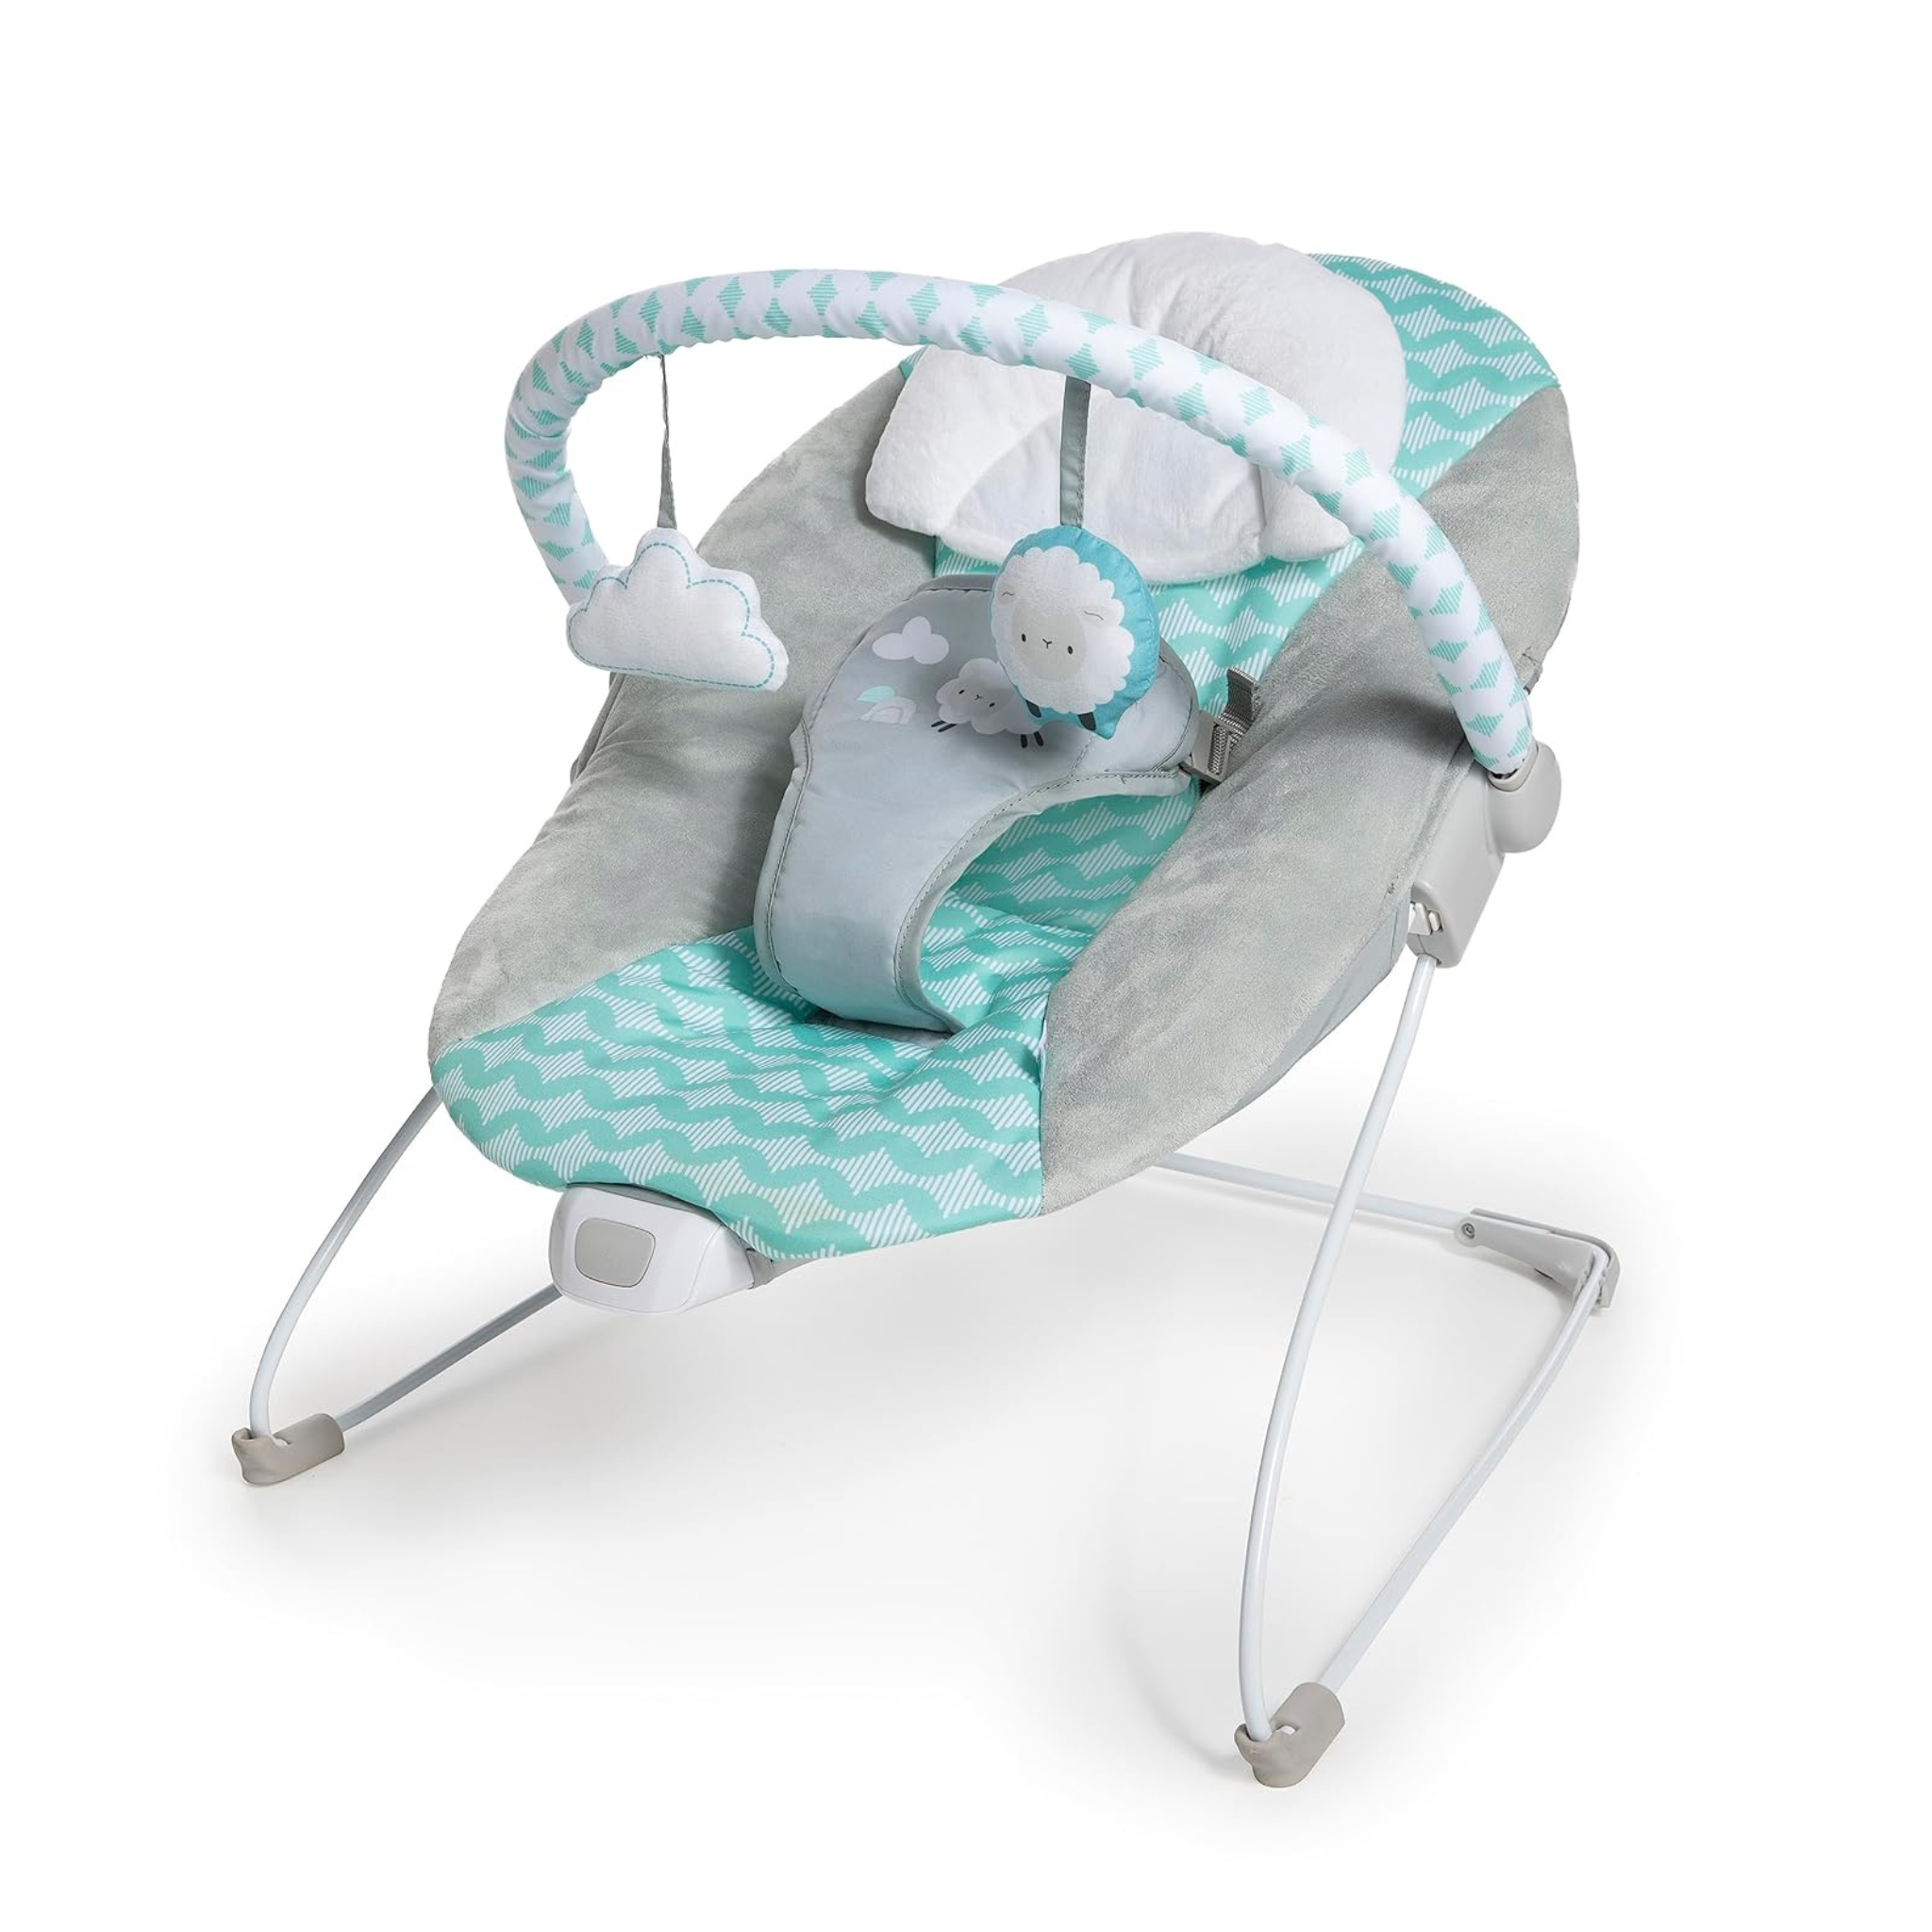 Ingenuity Ity Bouncity Bounce Vibrating Deluxe Baby Bouncer Seat